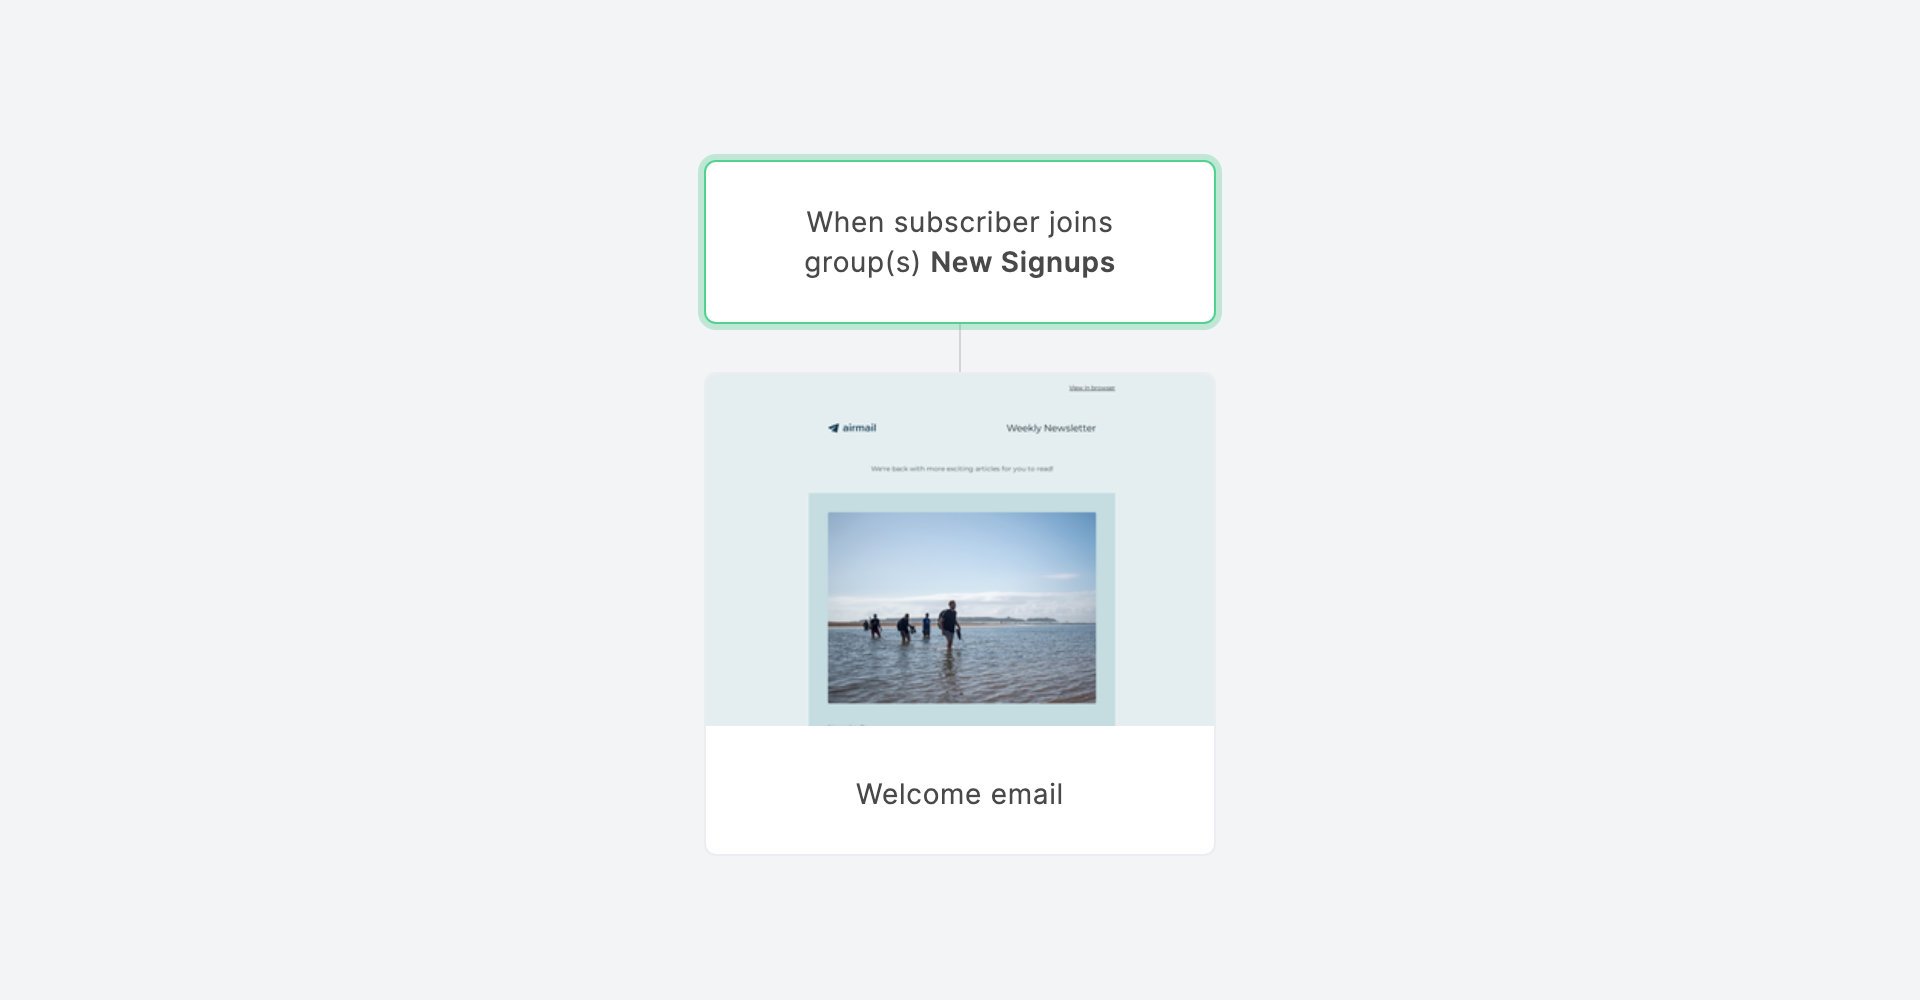 Welcome email sequence template